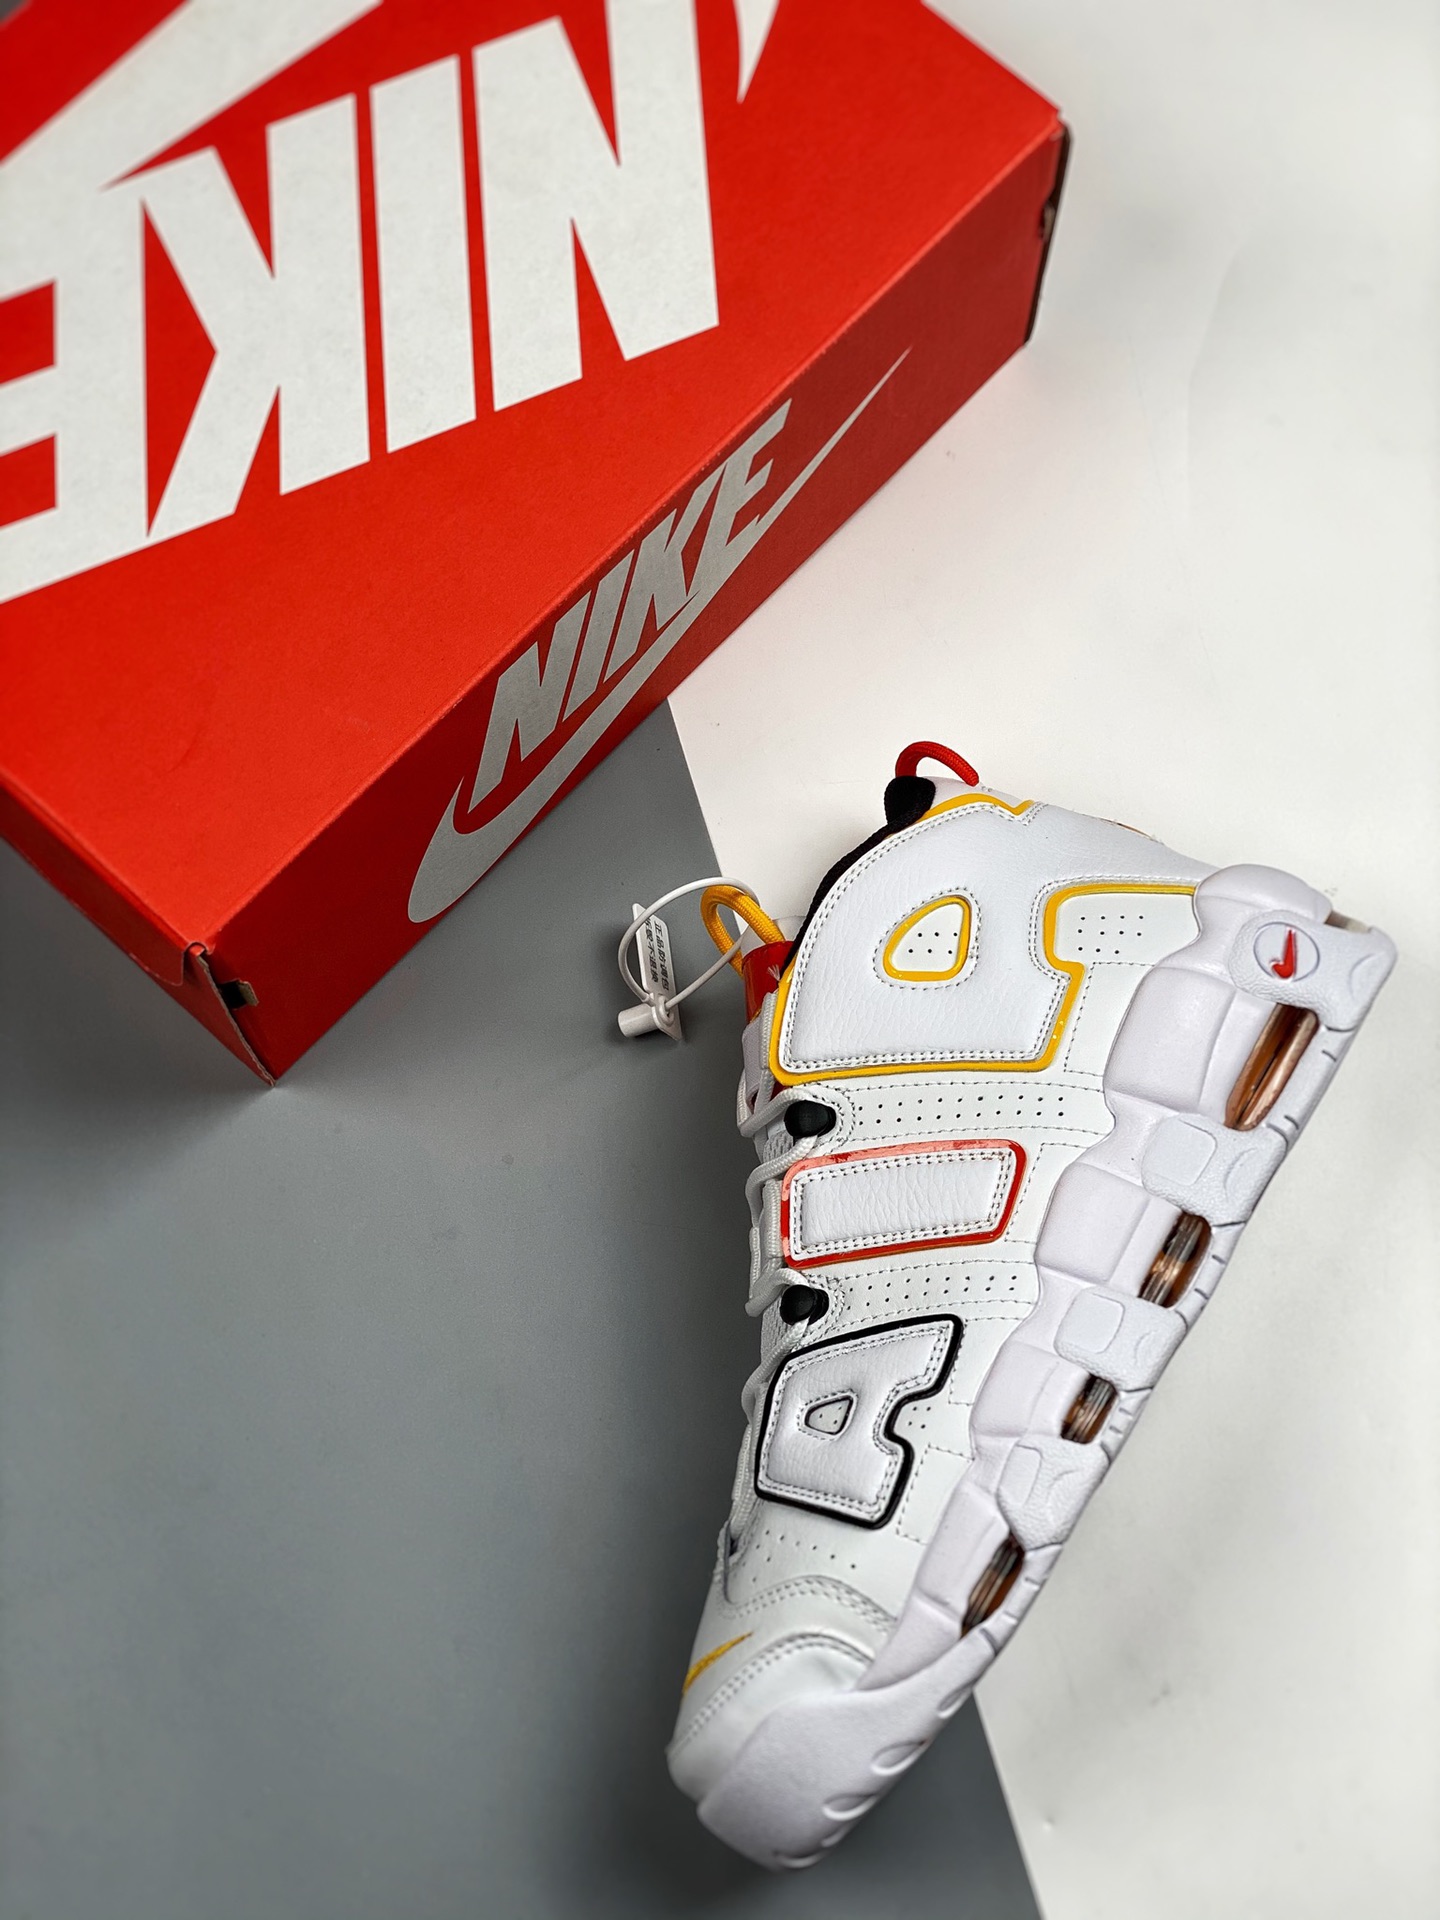 Nike Air More Uptempo “Rayguns” DD9282-100 For Sale – Sneaker Hello